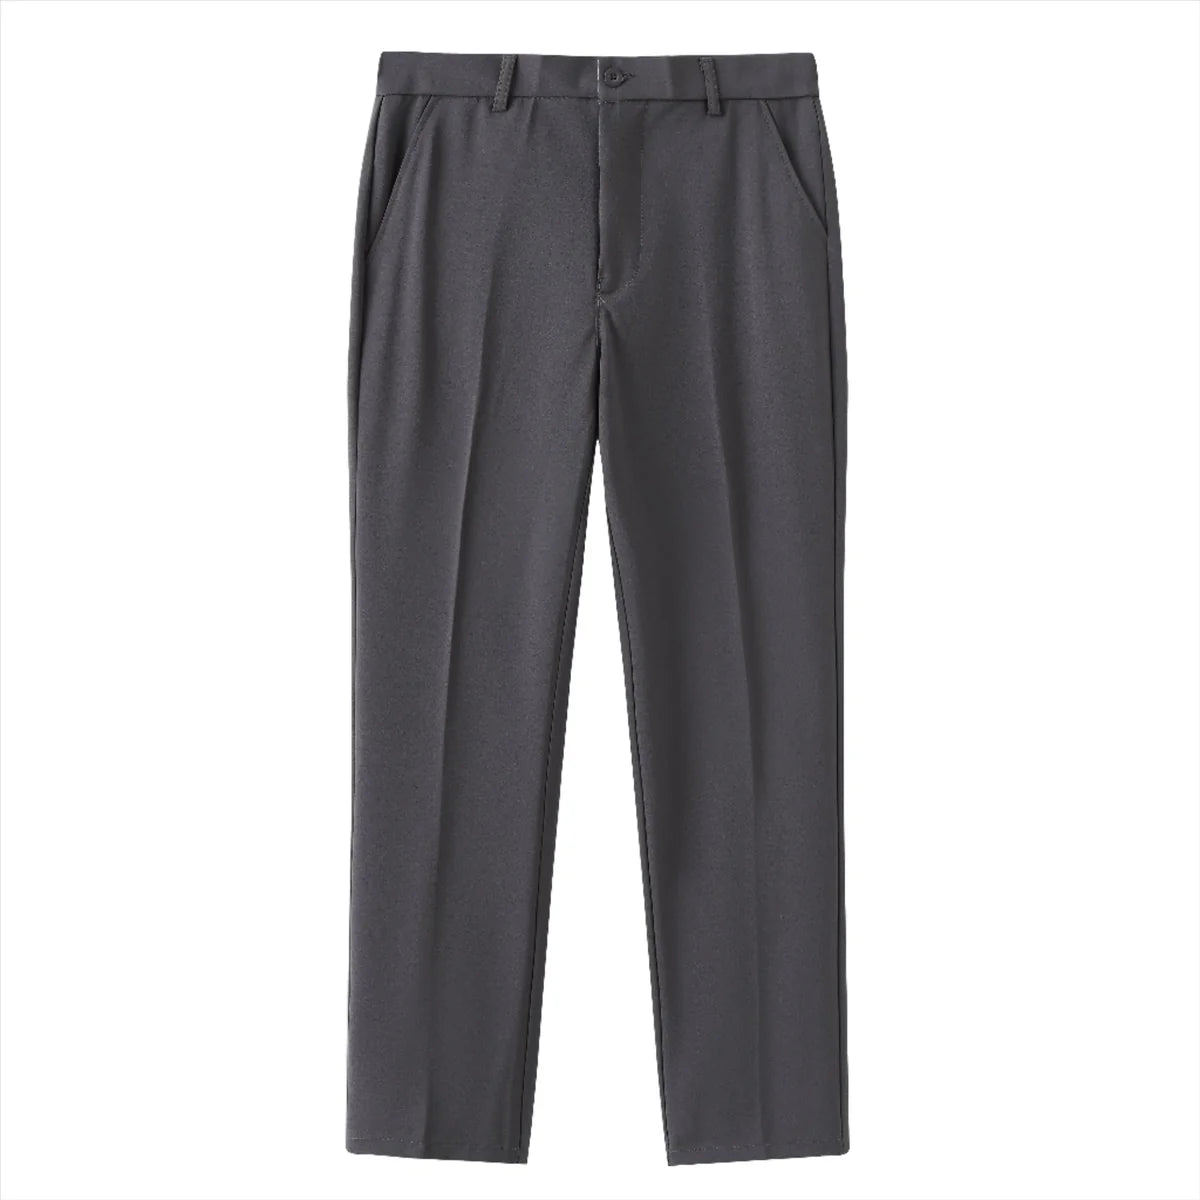 AUGUSTO STRETCH PANTS